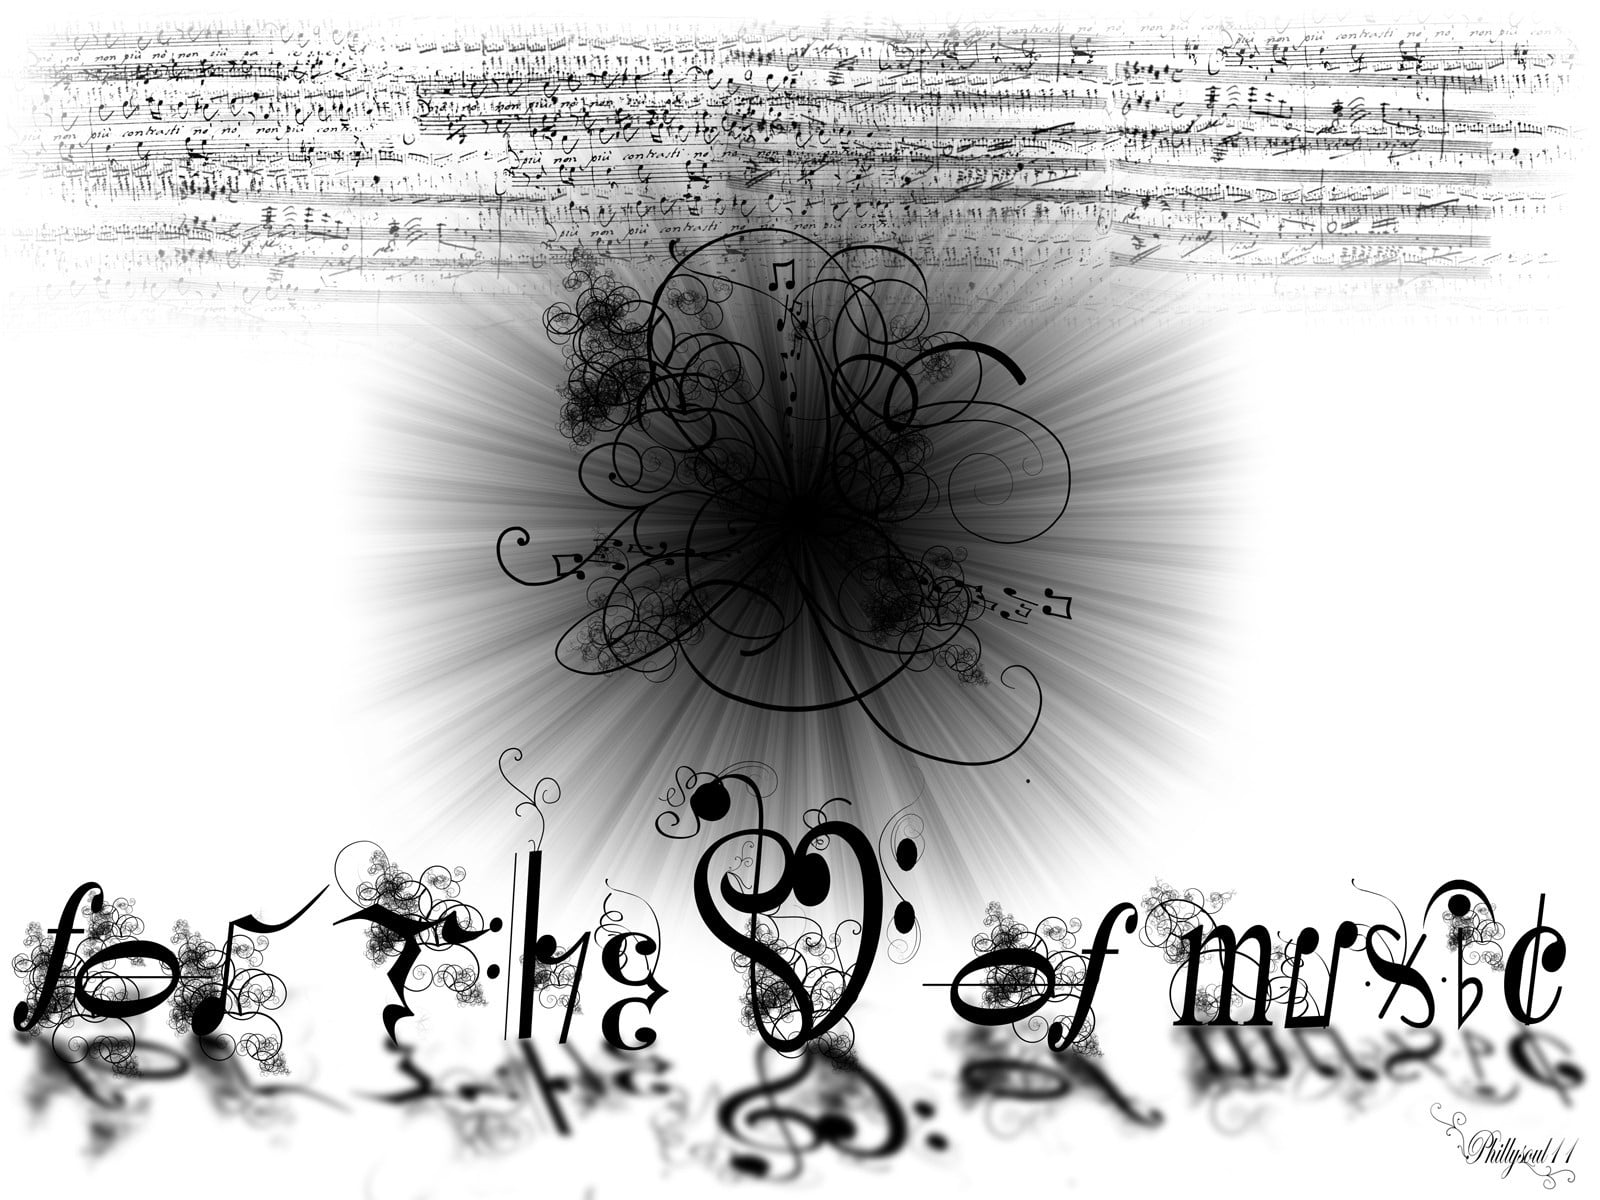 black music text, musical notes, music